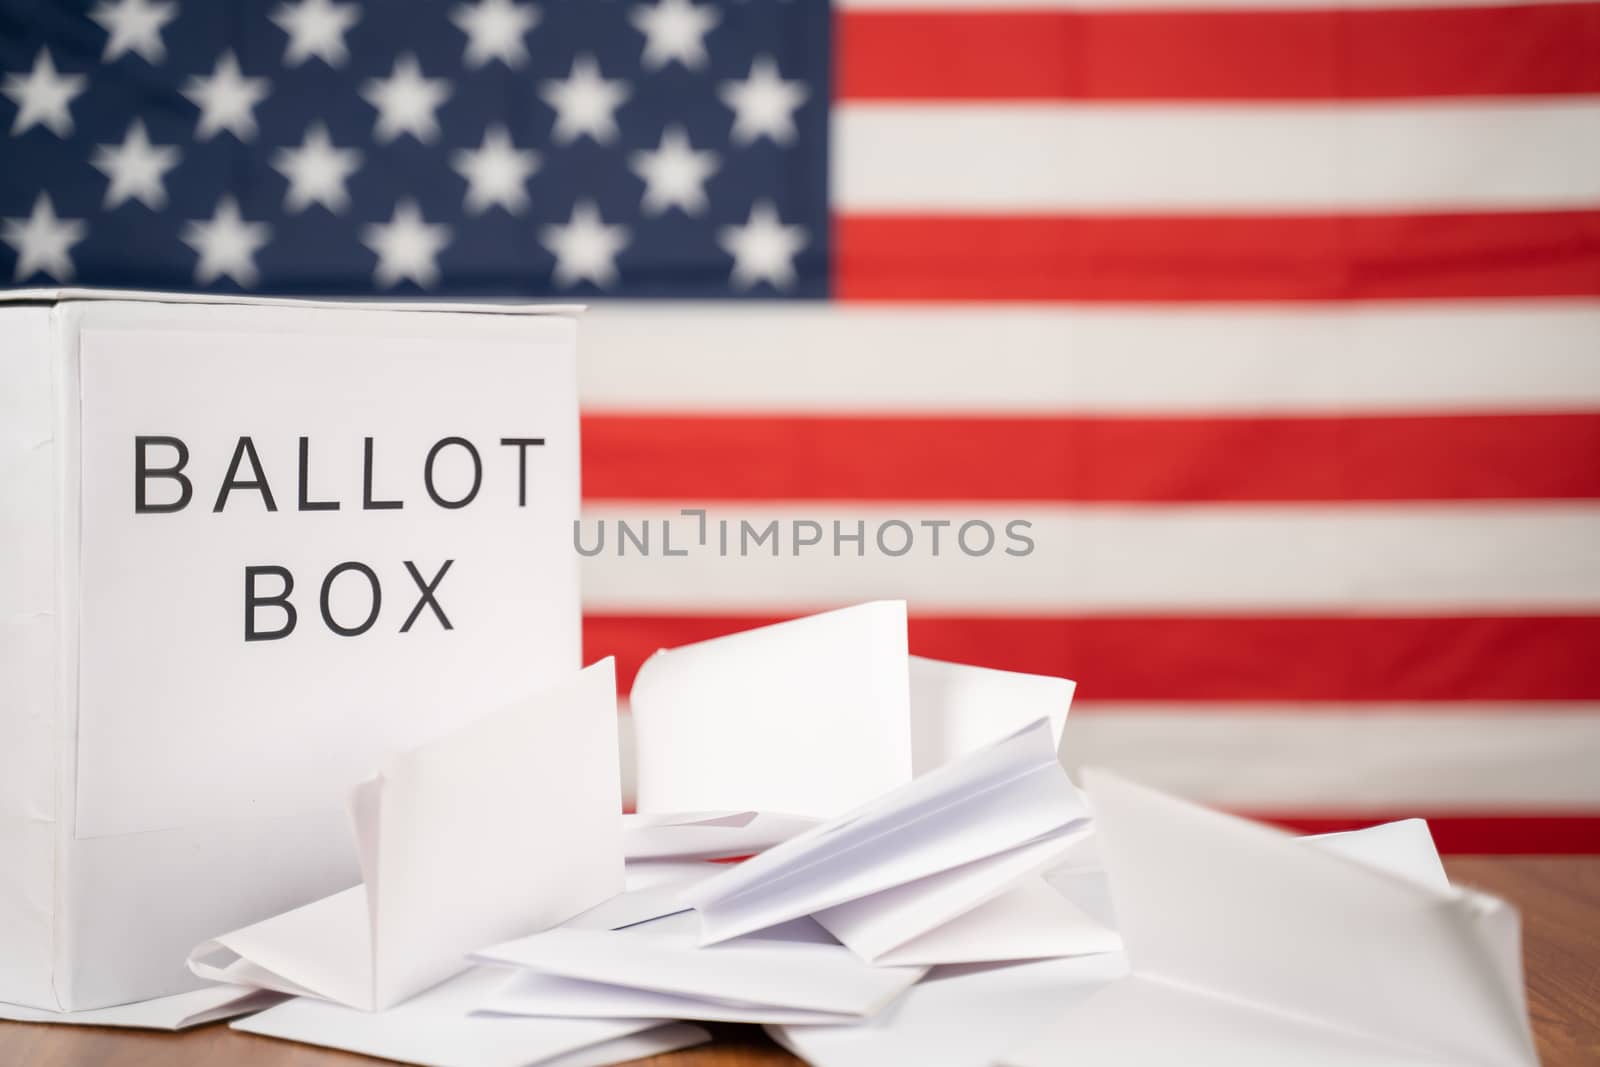 Ballot Box with votes on table before counting with US flag as background concept of Ballot or vote Counting after US election by lakshmiprasad.maski@gmai.com